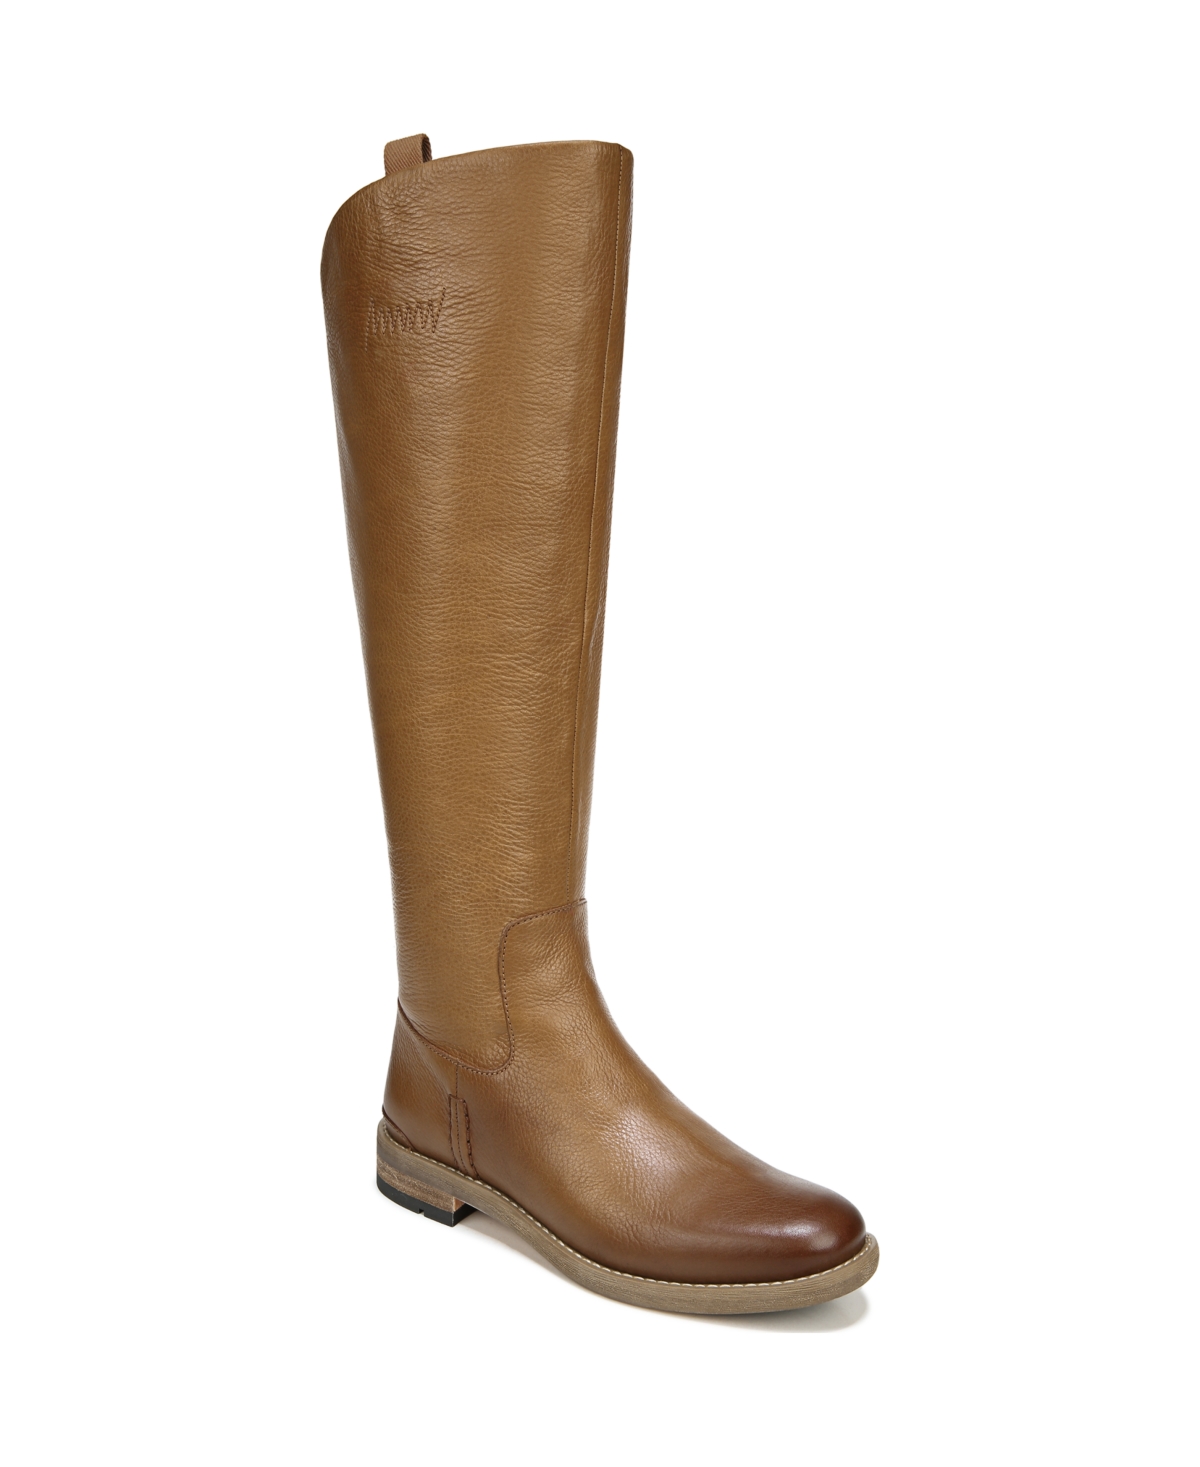 Meyer Wide Calf Knee High Riding Boots - Light Brown Leather